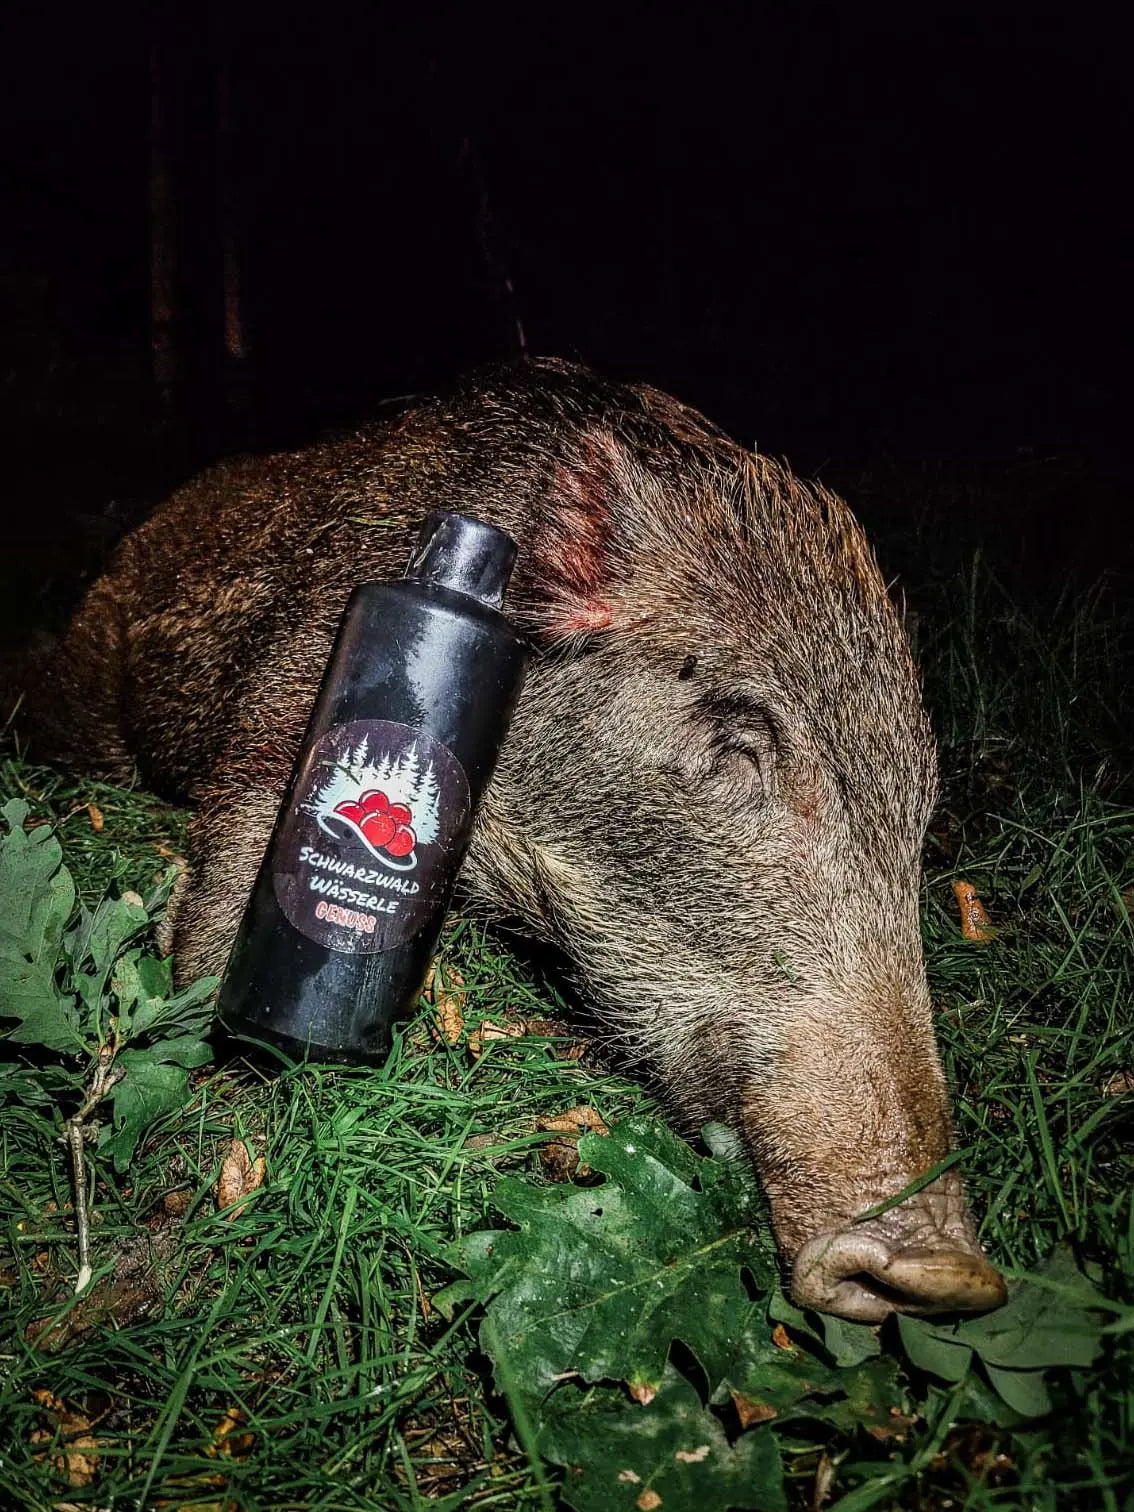 Delight - Attract wild boar and roe deer